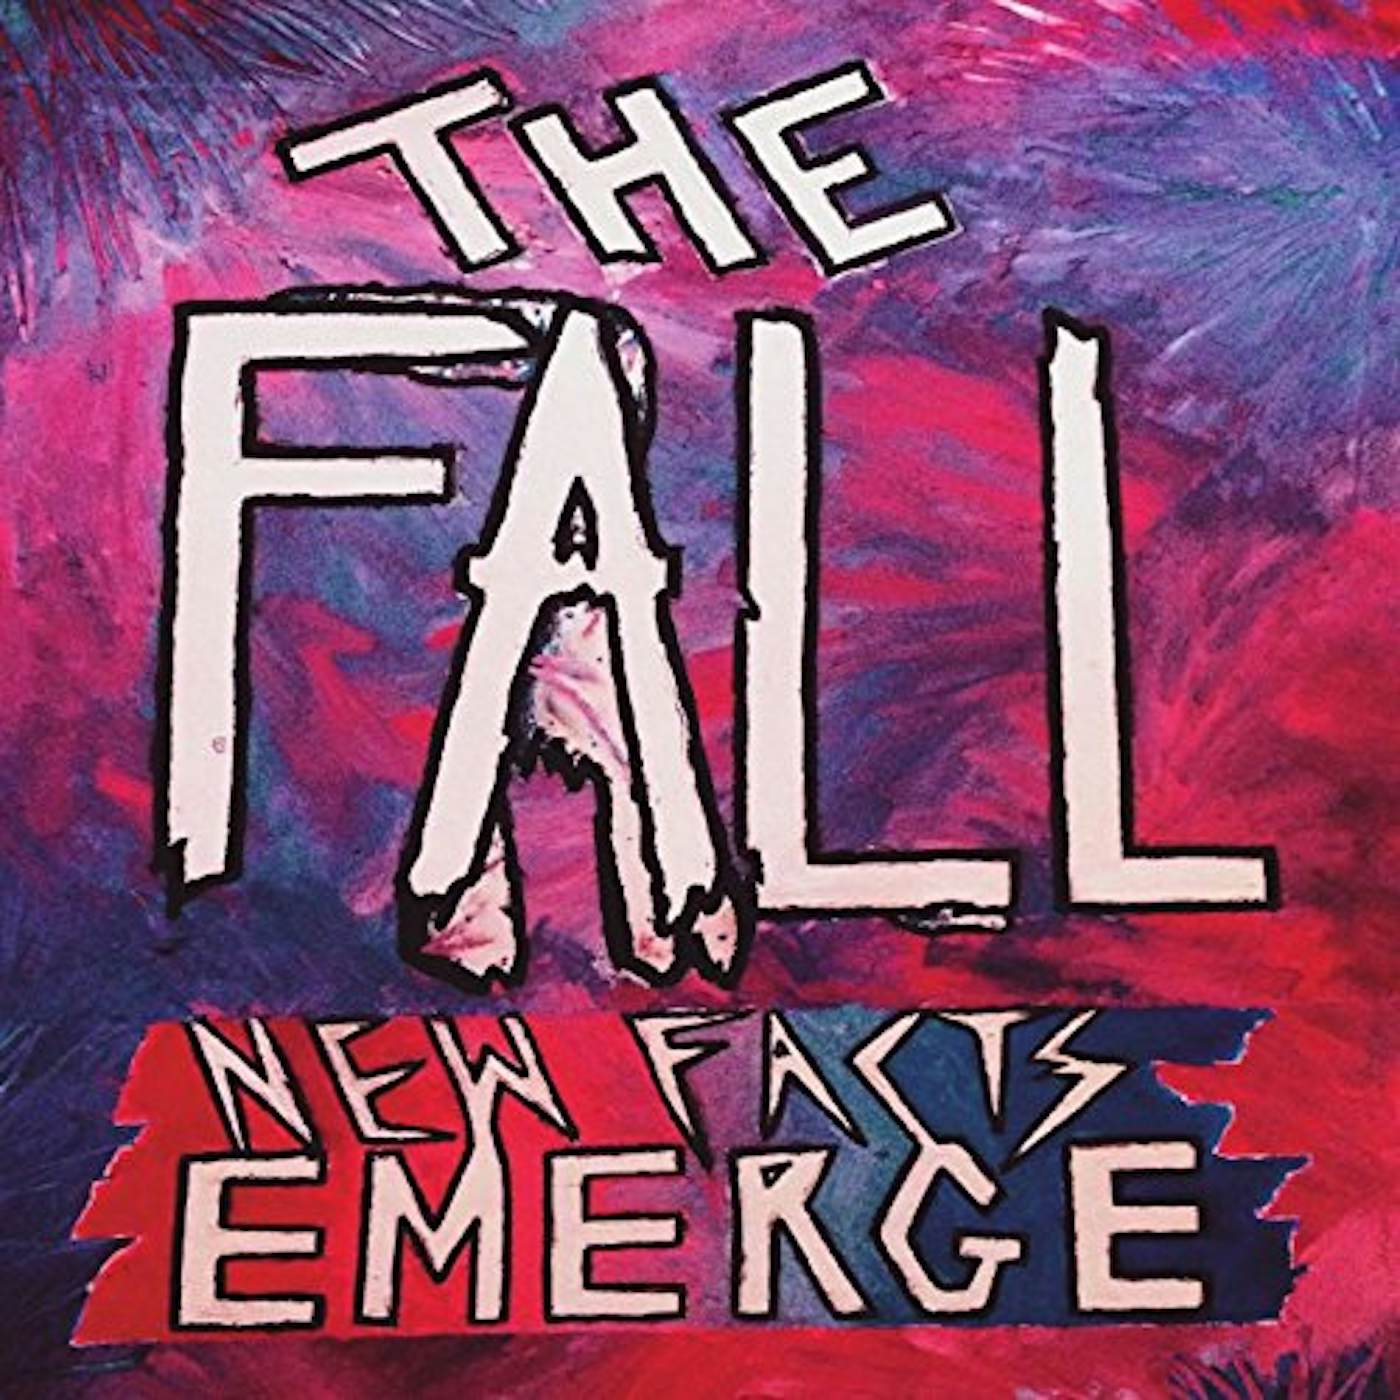 The Fall NEW FACTS EMERGE CD